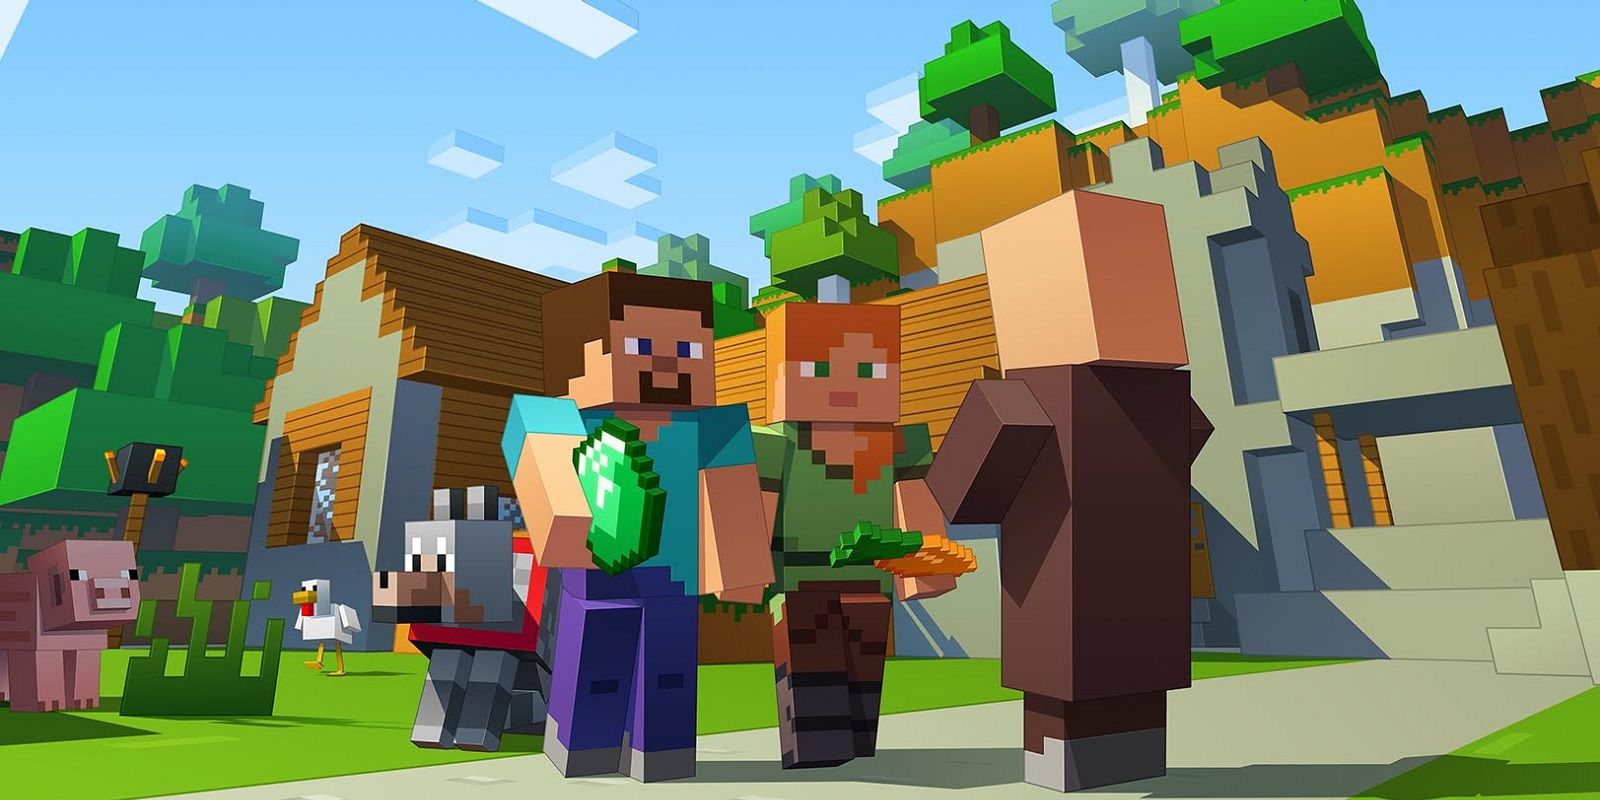 Minecraft characters trading with villager